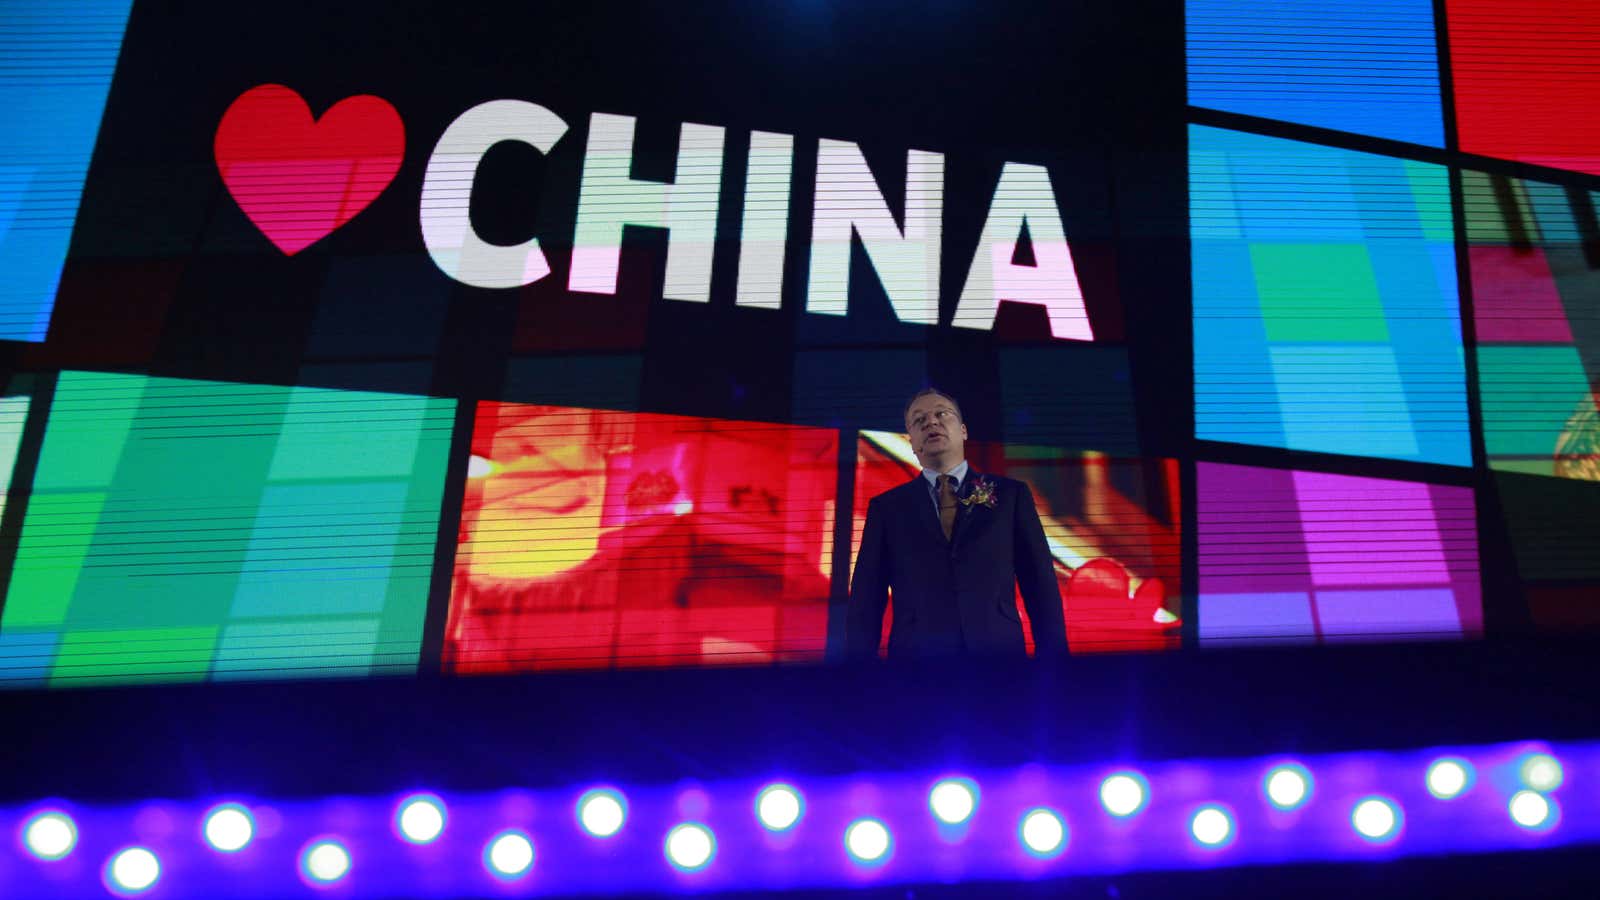 Despite Nokia CEO Stephen Elop’s apparent love of China, Nokia’s sales there shrank 79% in 2012.